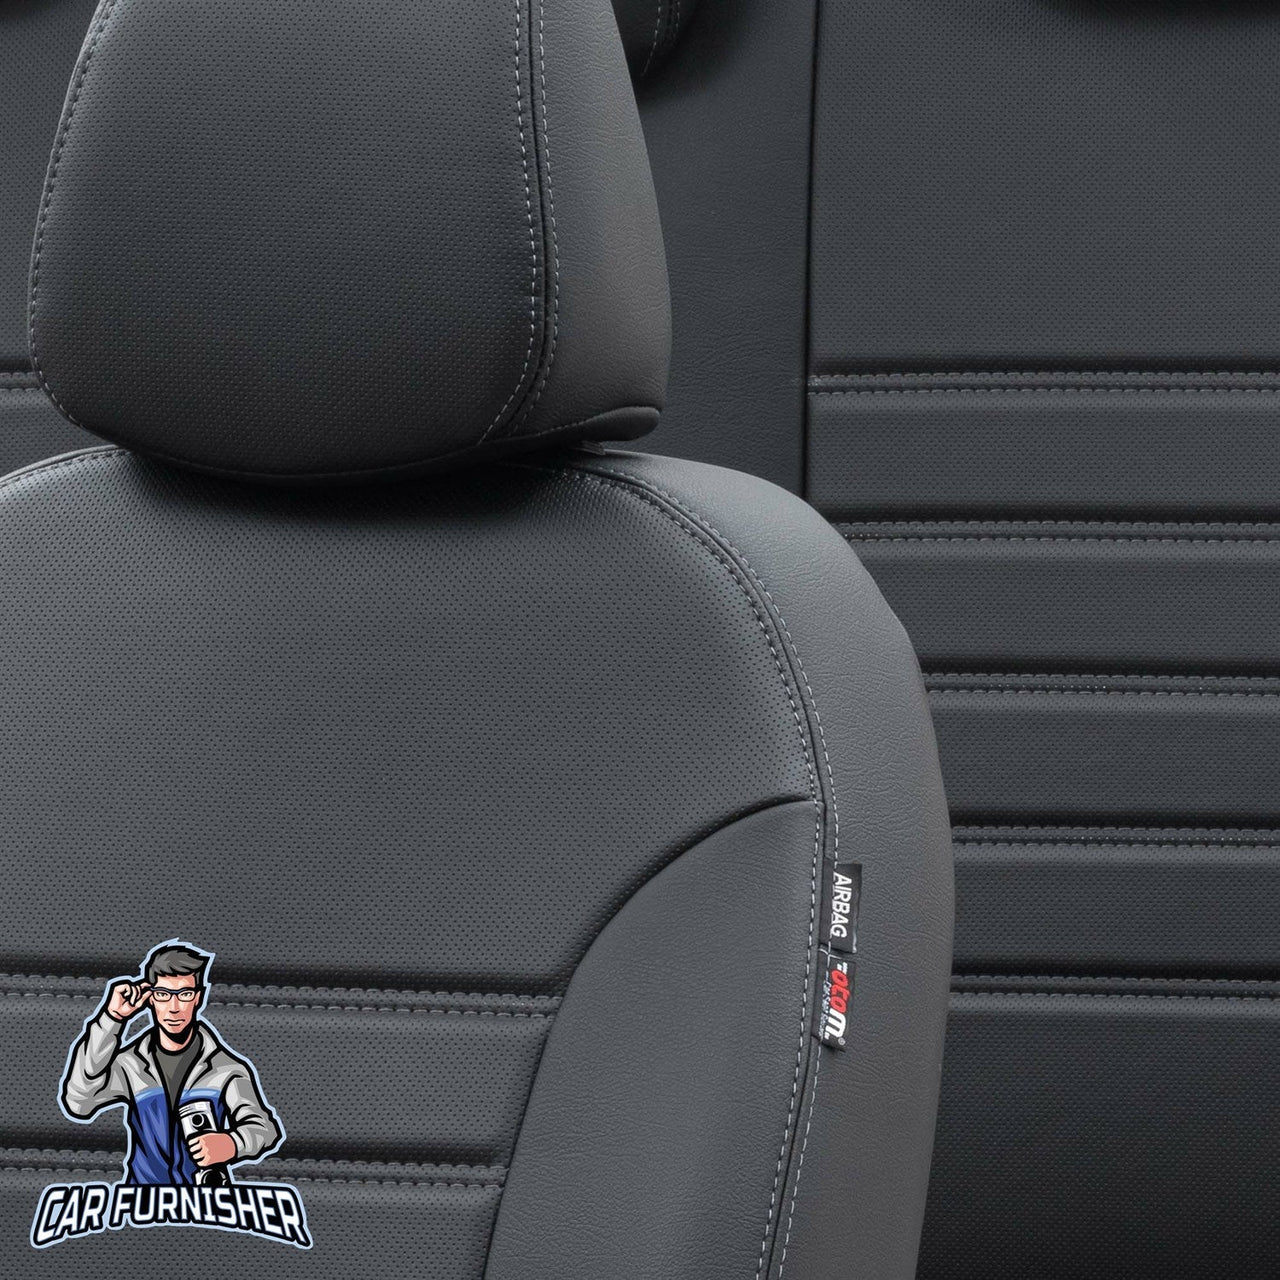 Chevrolet Spark Seat Covers Istanbul Leather Design Black Leather